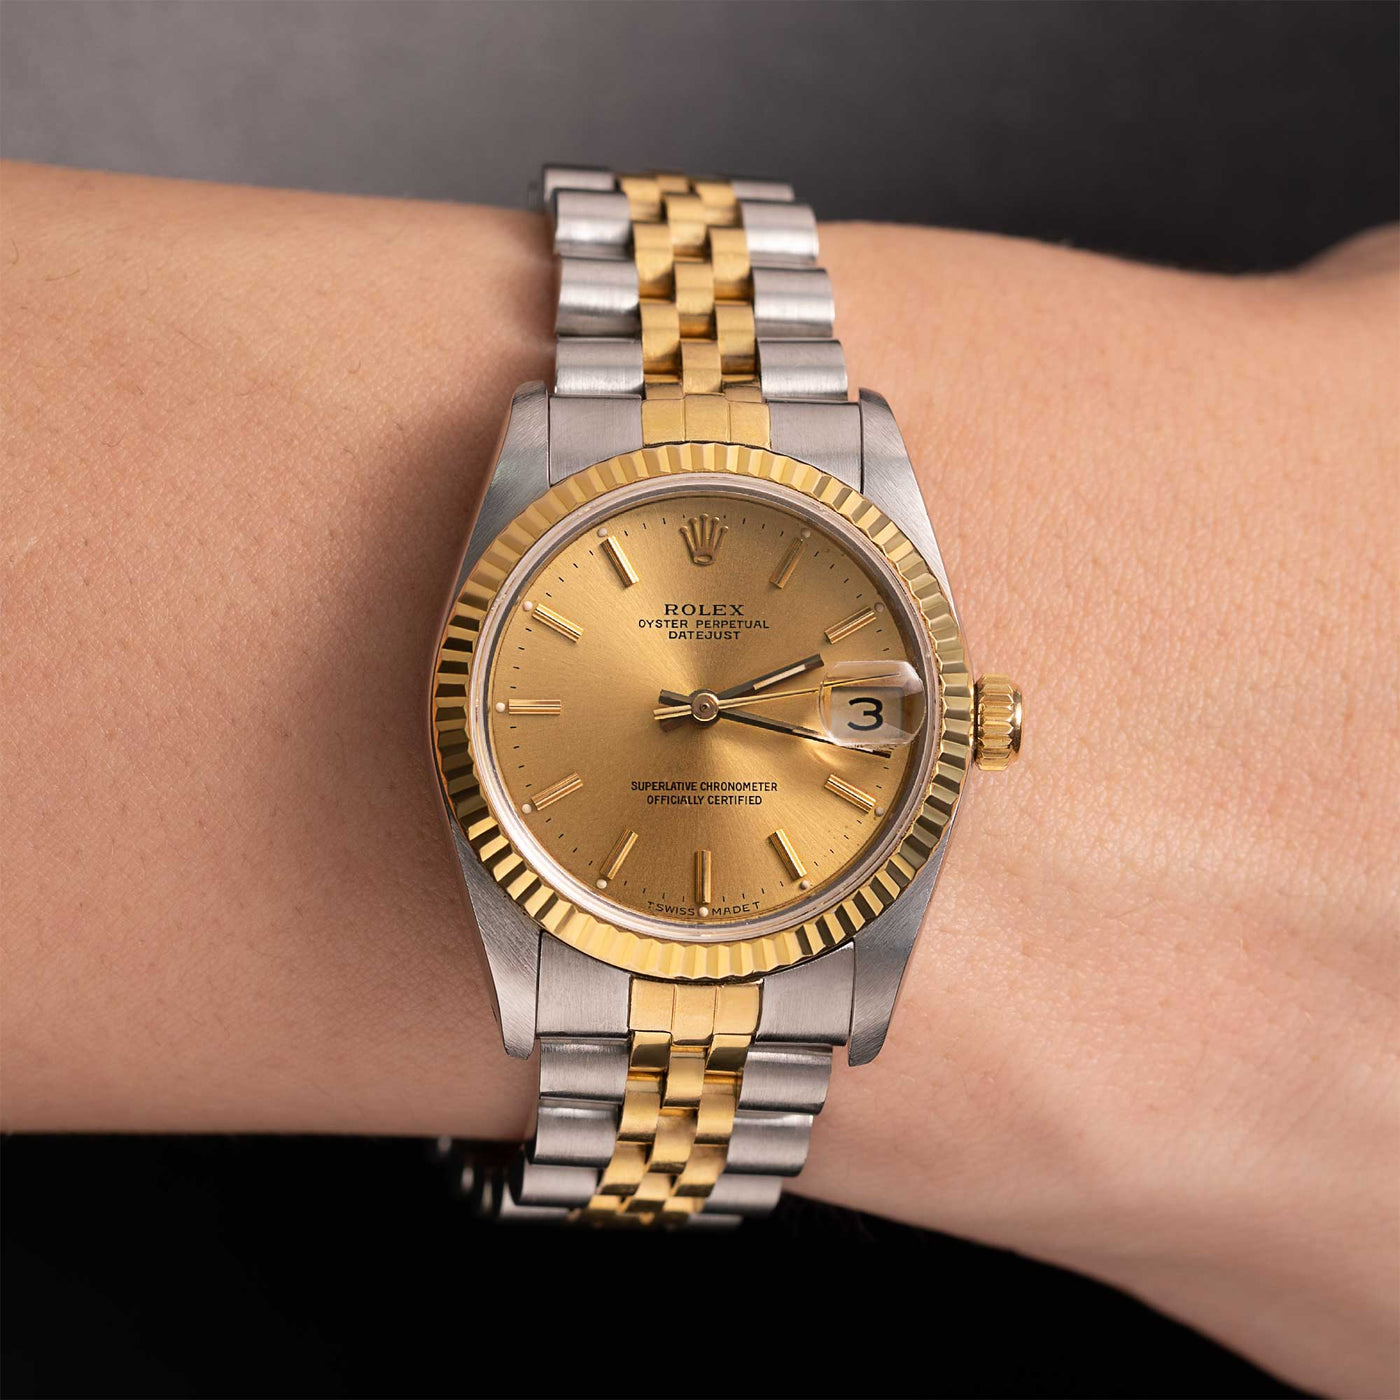 Rolex Datejust Fluted Bezel Watch 31mm Champagne Dial